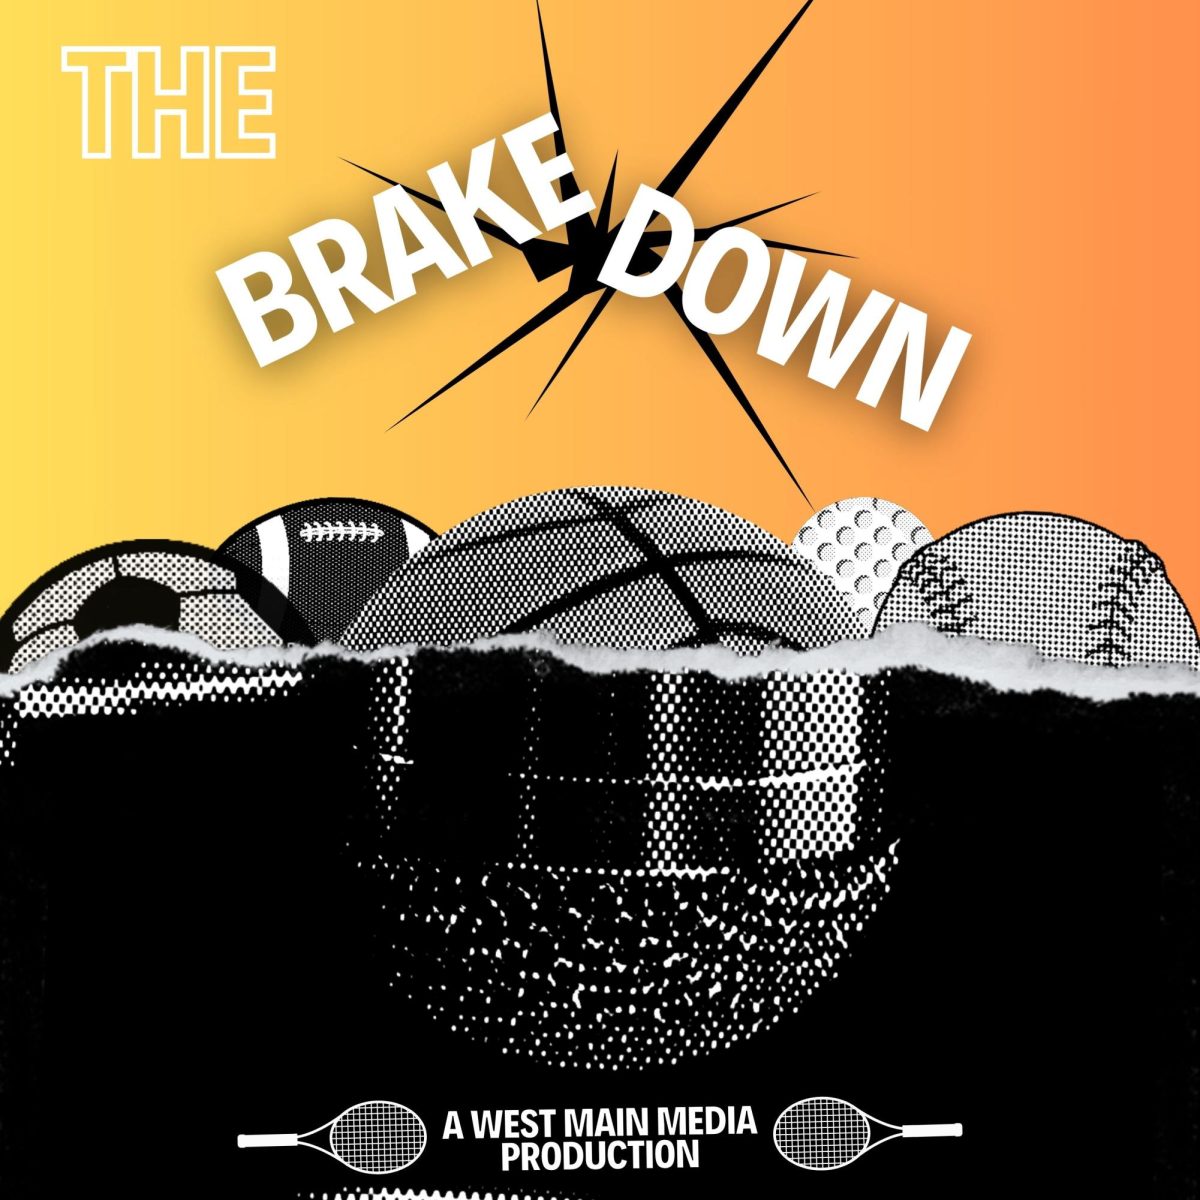 On each episode of The Brakedown, an interview explores the impact sports has on every aspect of a persons life.